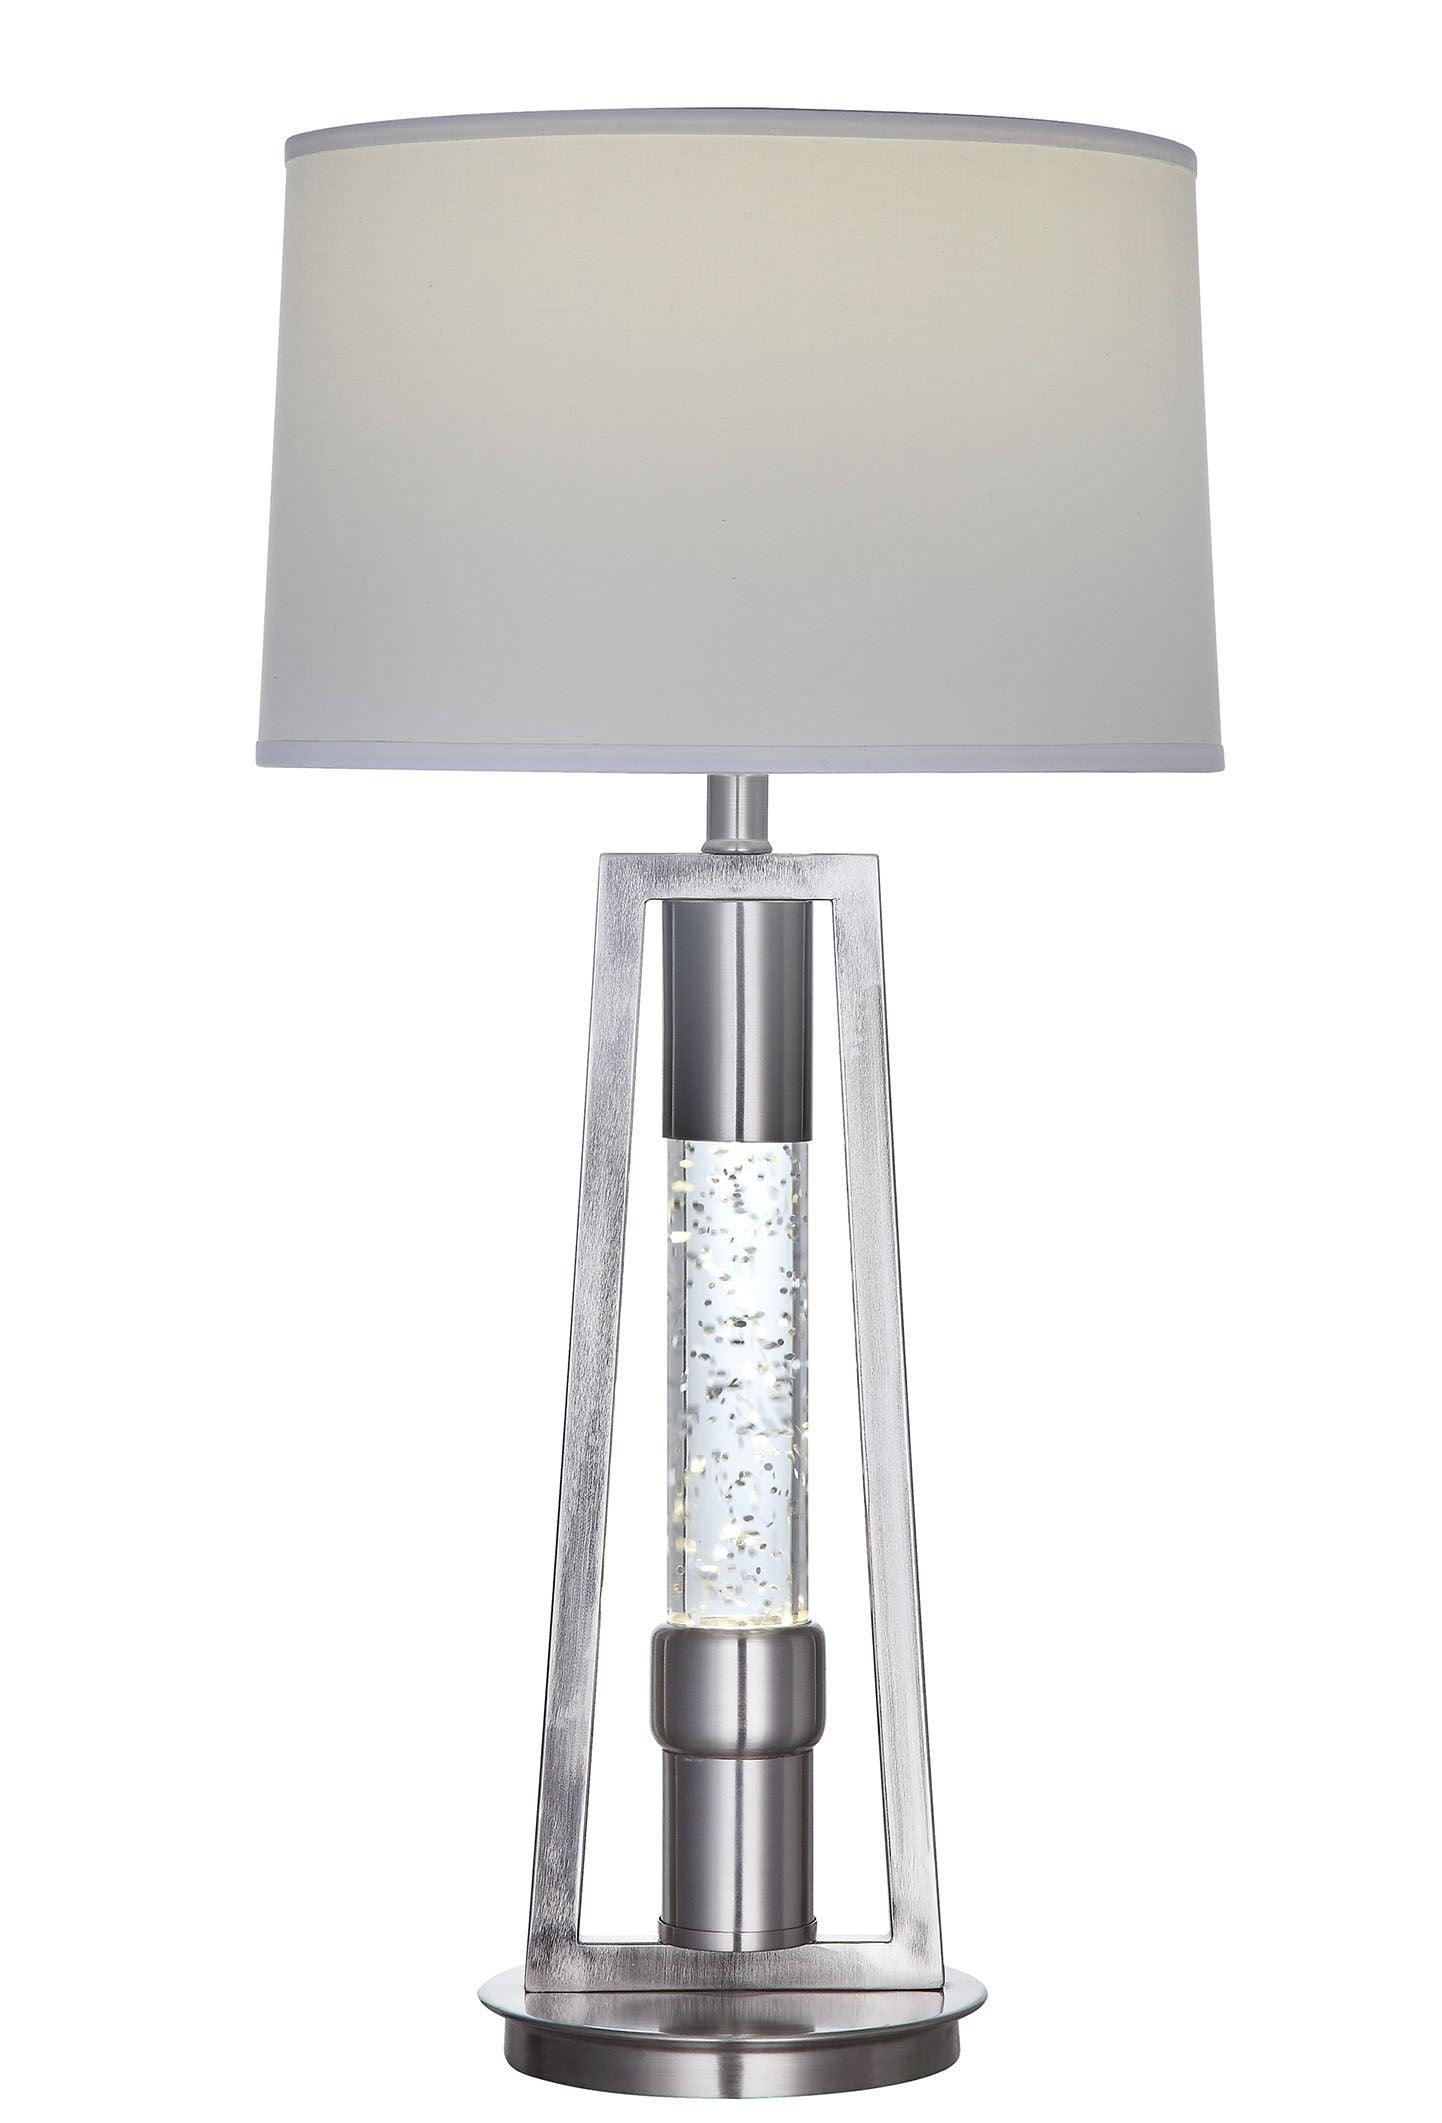 ACME - Ovesen - Table Lamp - Brushed Nickel - 5th Avenue Furniture